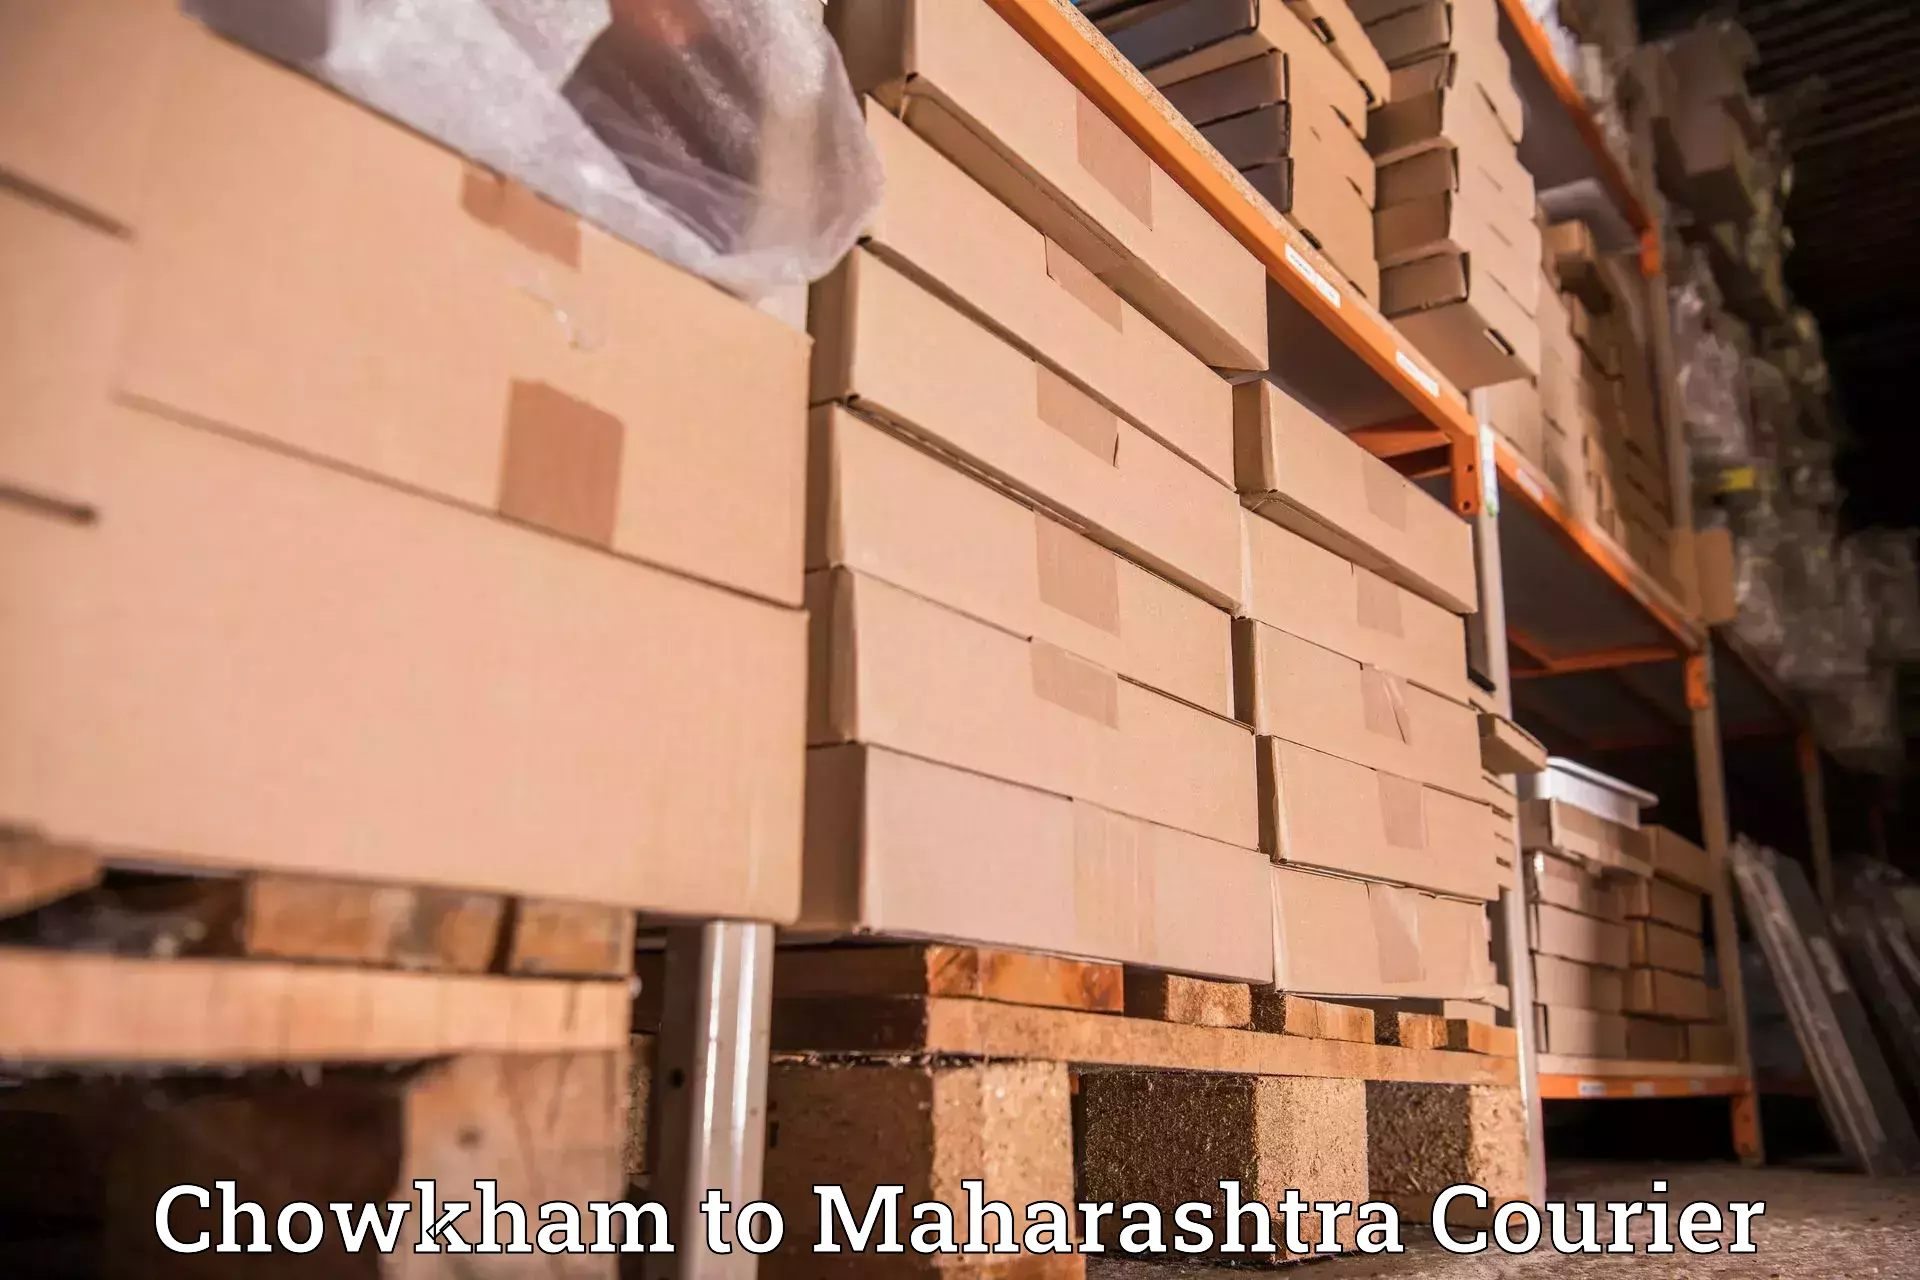 Expedited parcel delivery in Chowkham to Nashik